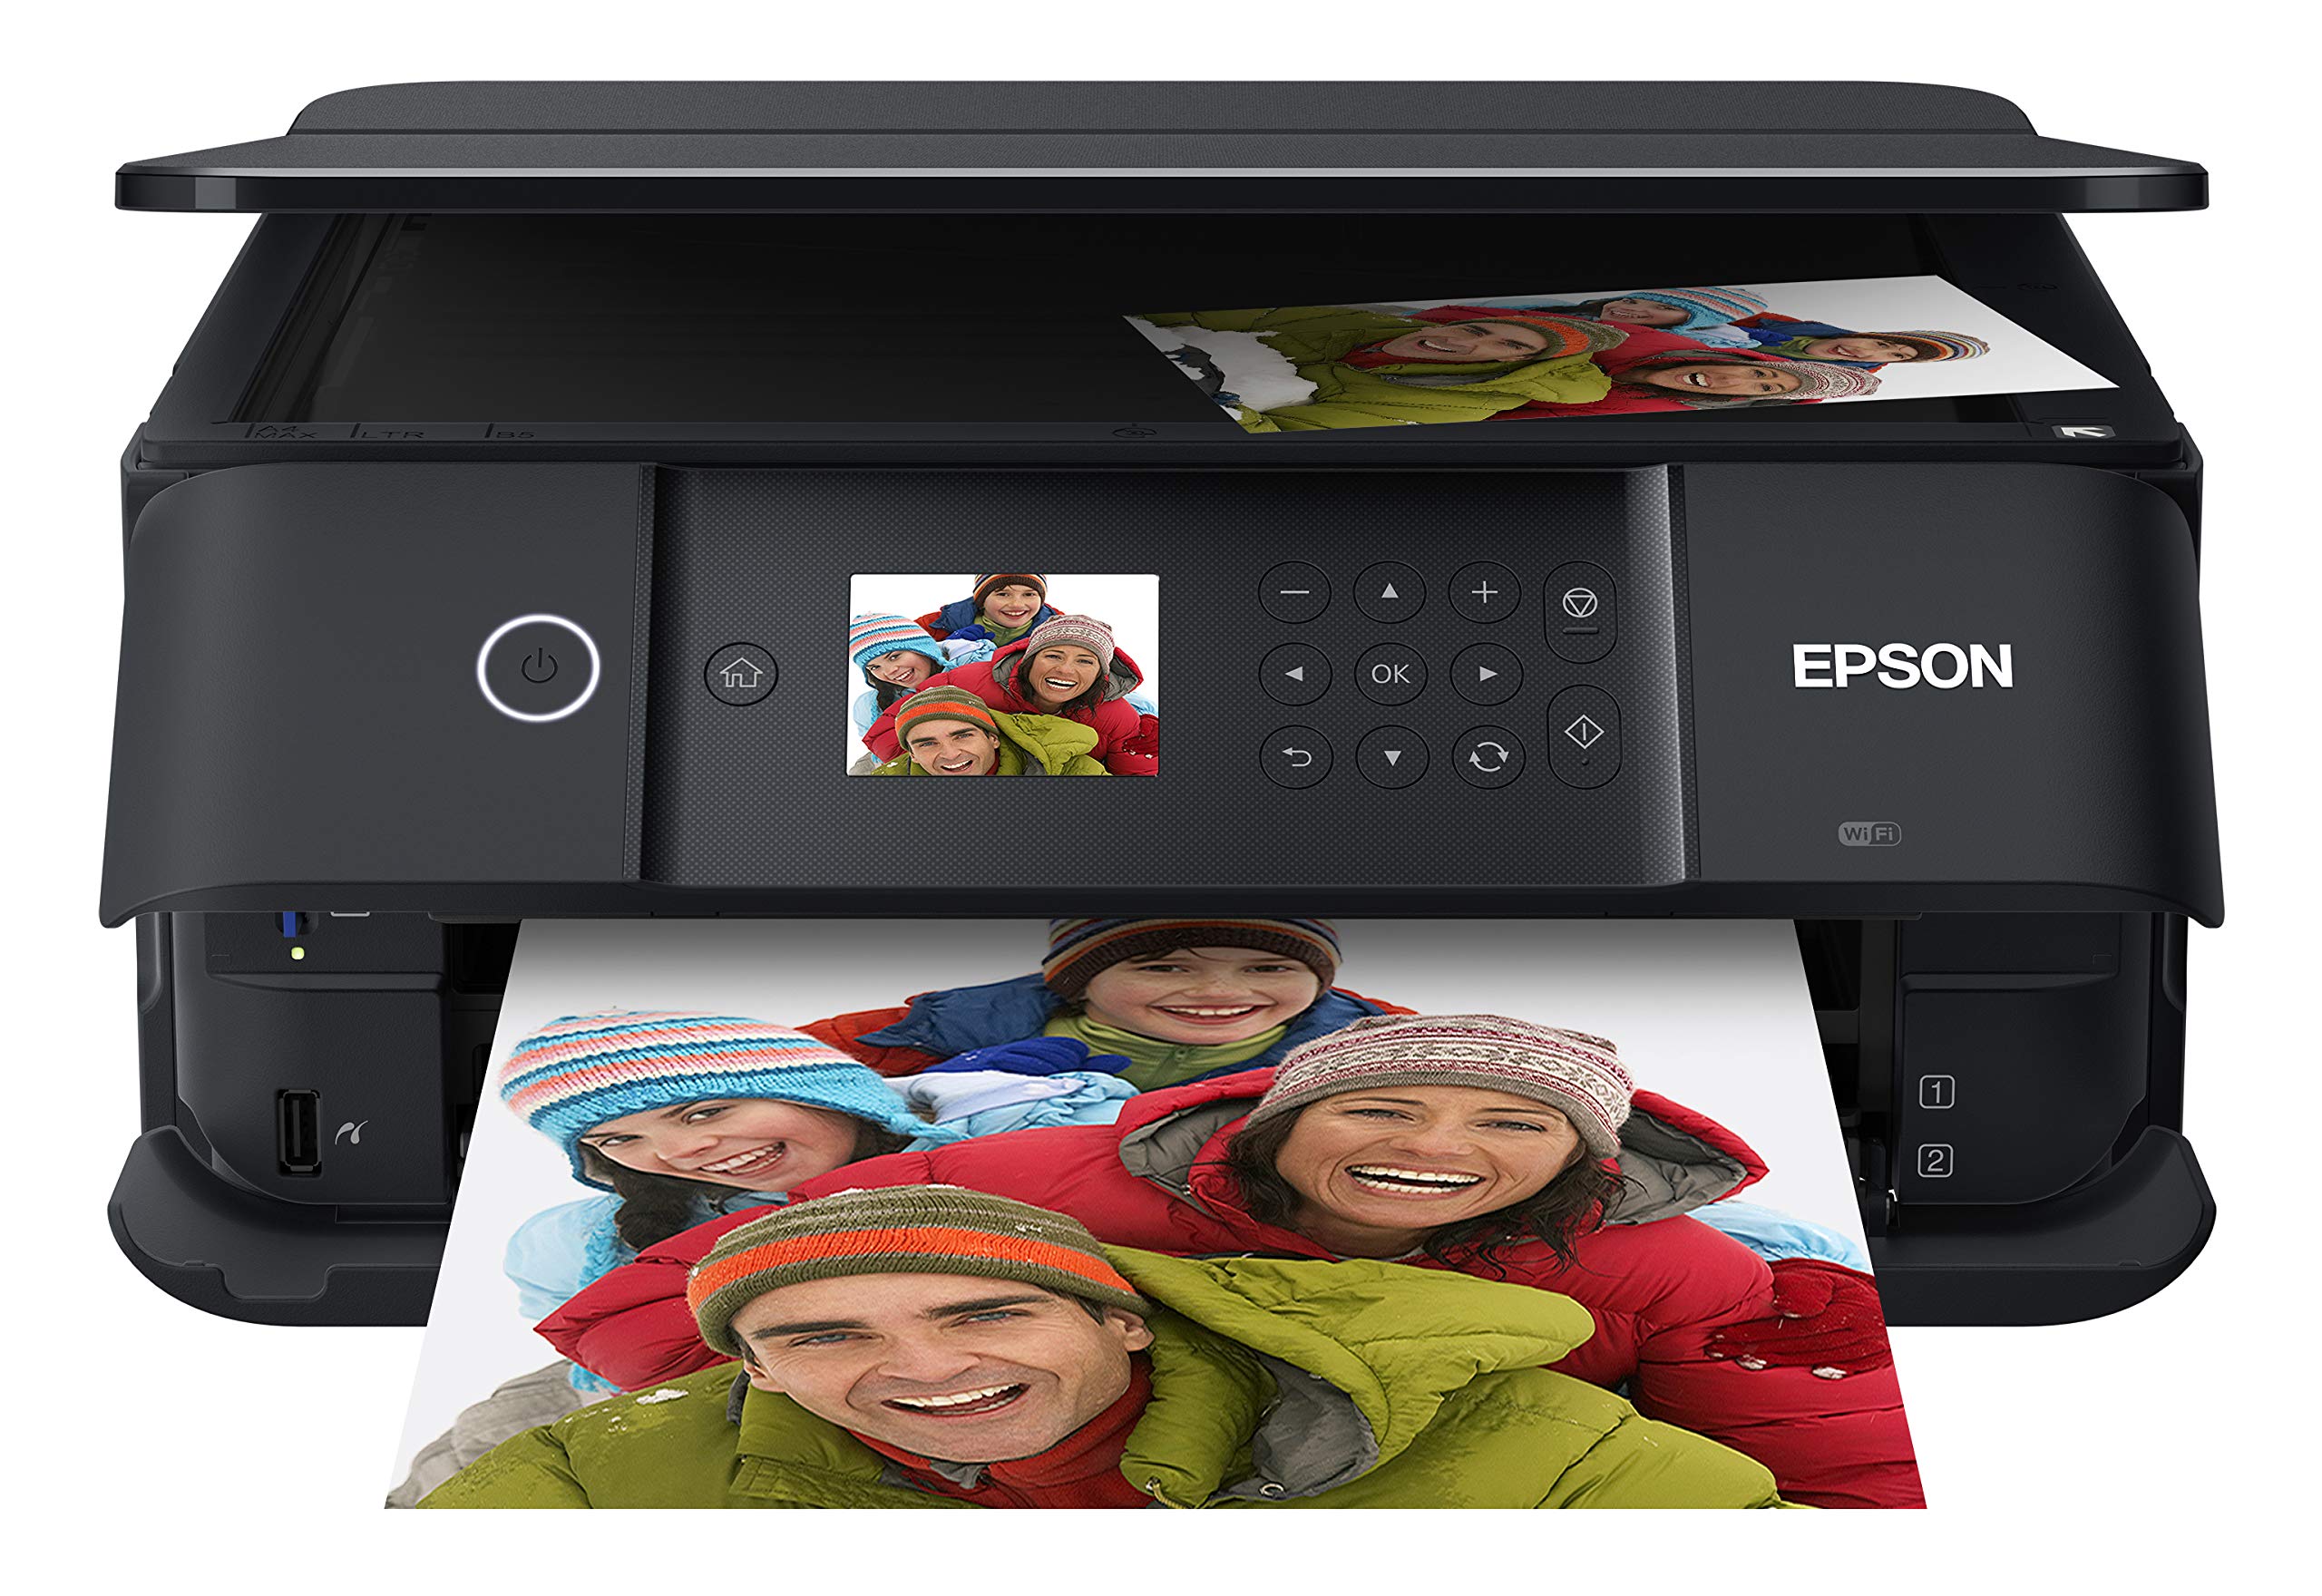 Epson Expression Premium Wireless Color Photo Printer with ADF, Scanner and Copier, Black